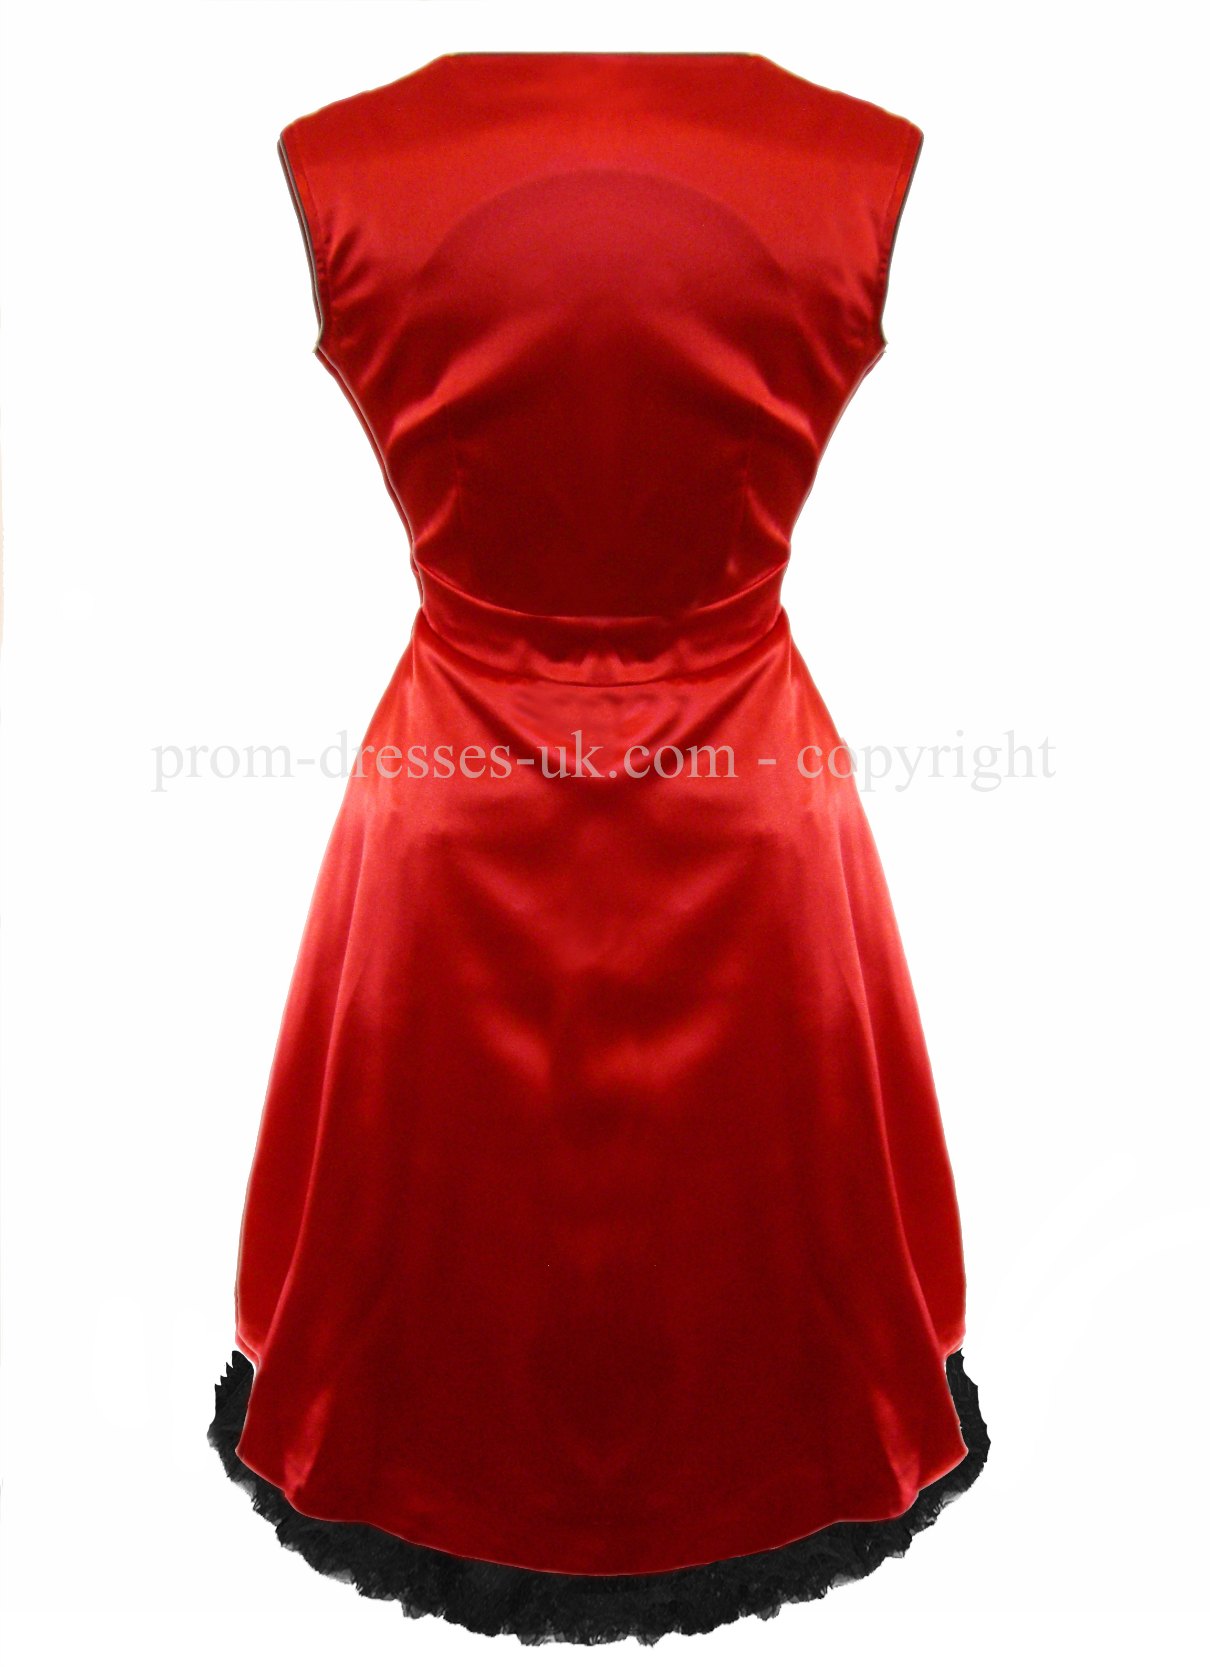 Enlarge Red Satin Bow Dress